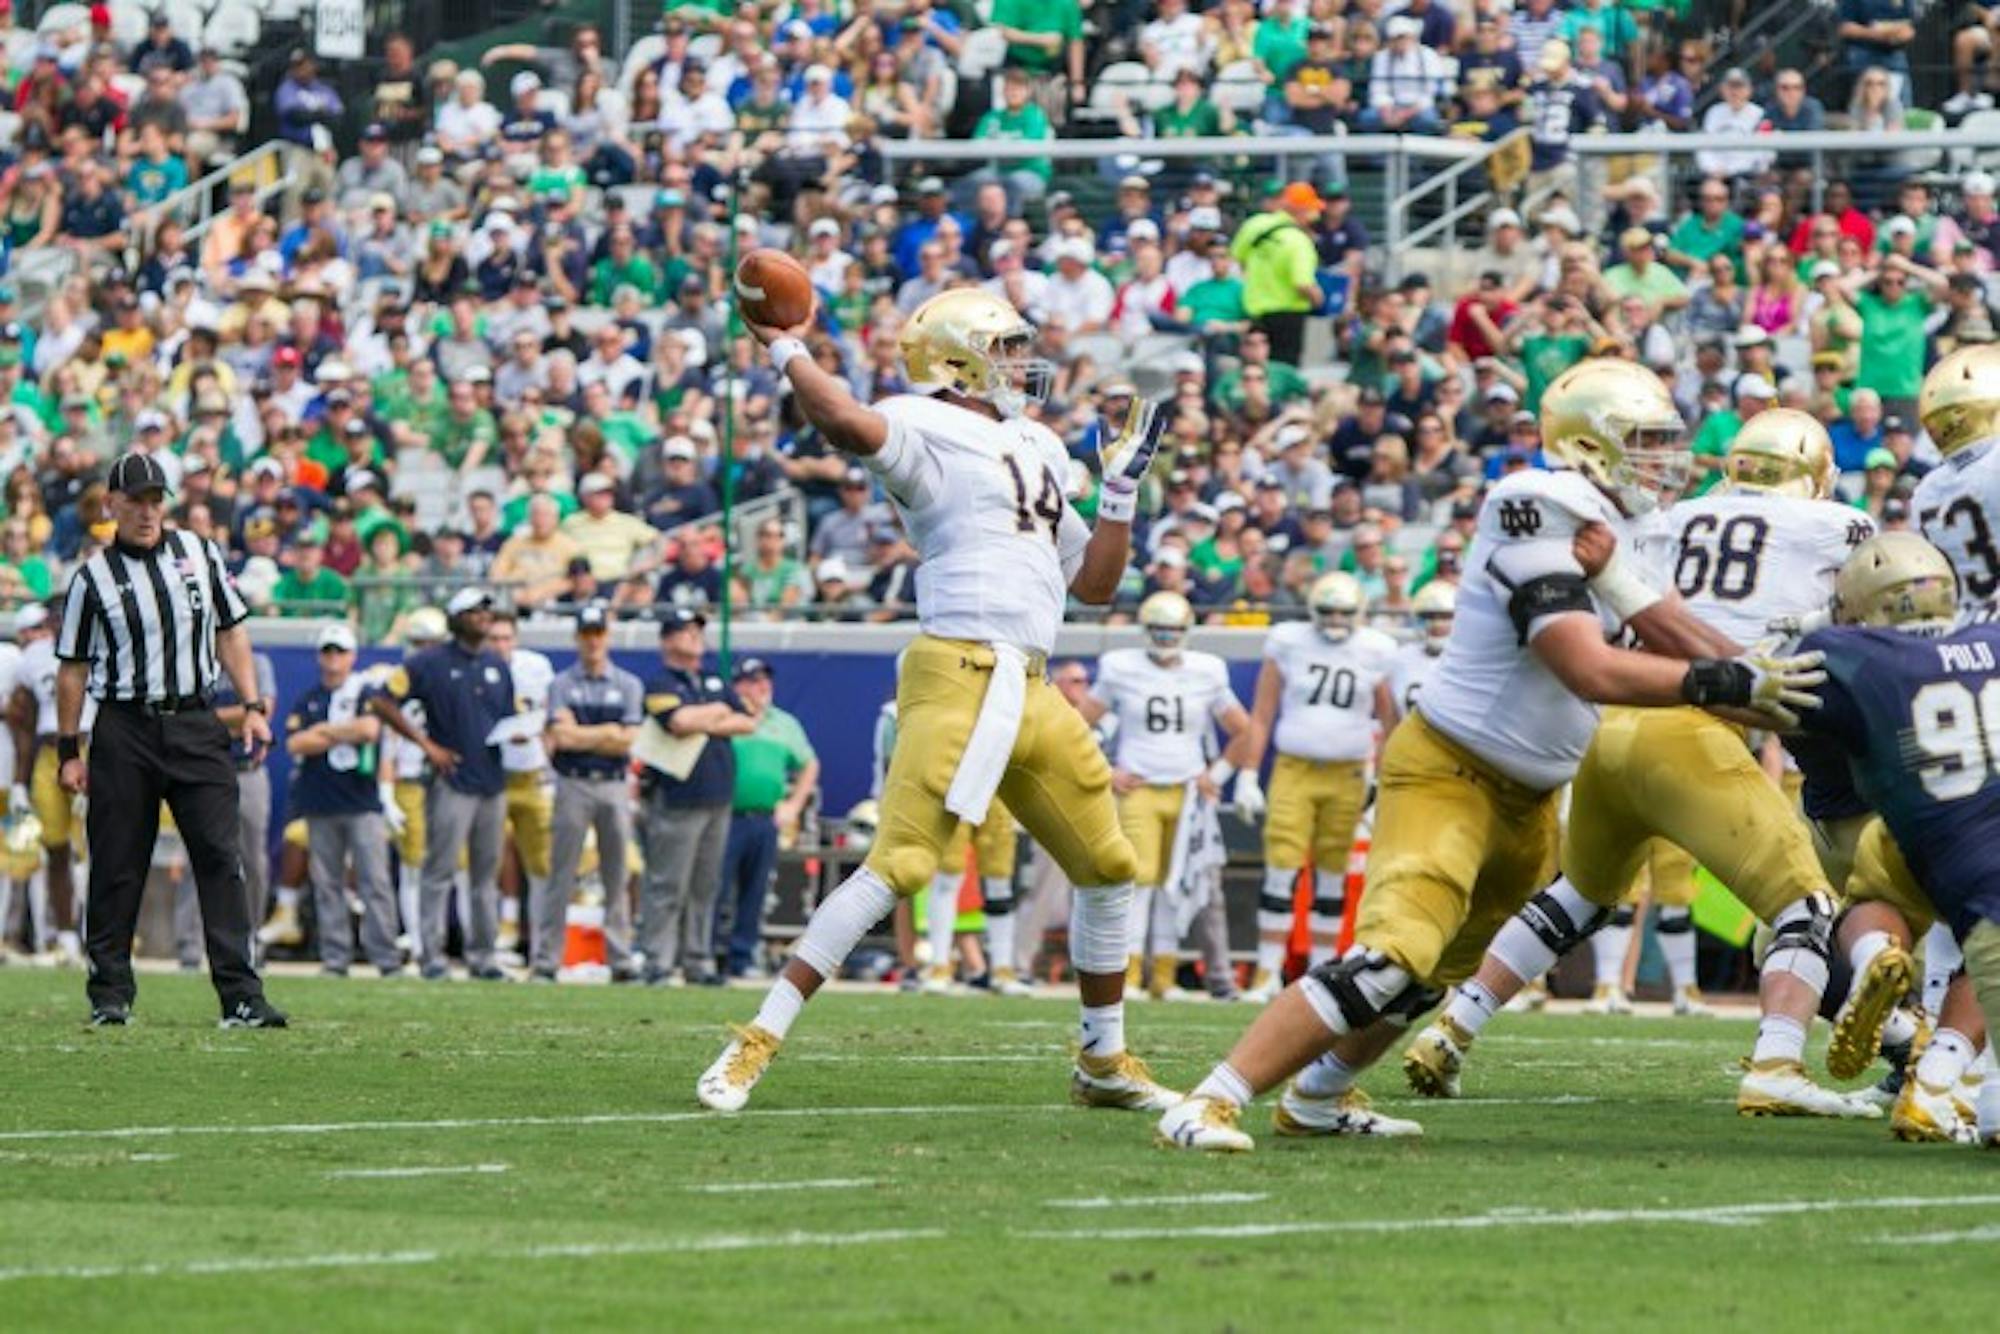 DeShone Kizer throws one downfield during Notre Dame's 27-28 loss to Navy.